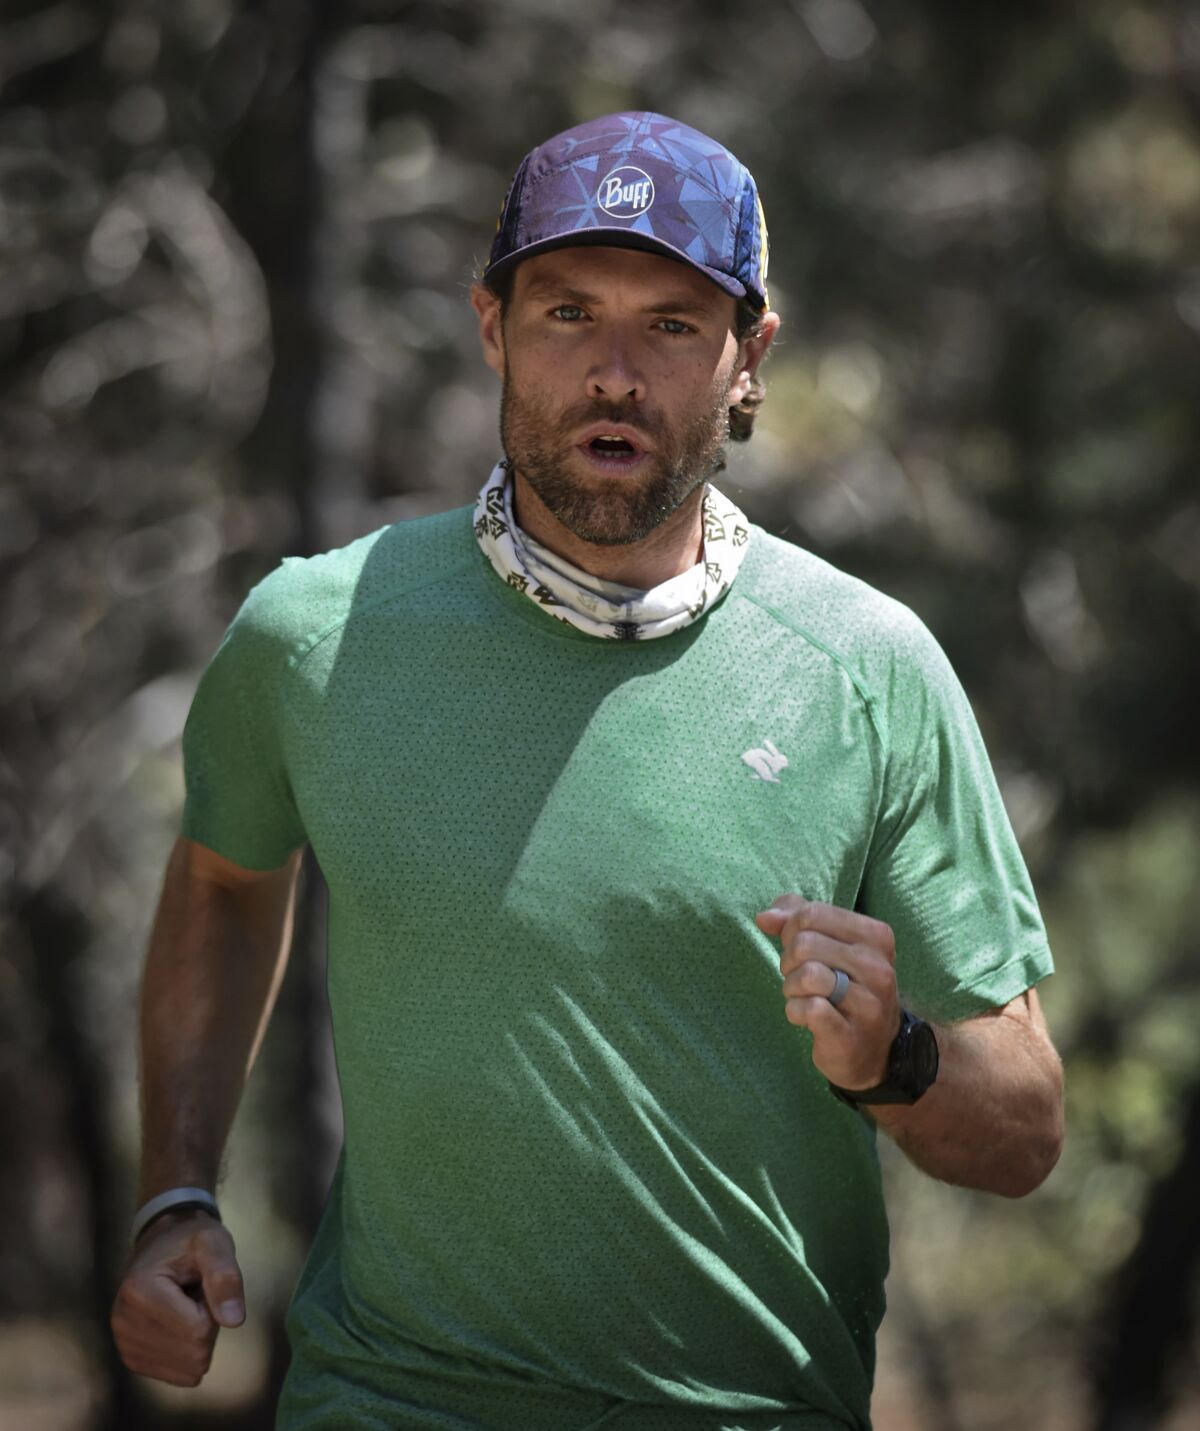 Professional runner Adam Kimble runs at Lake Tahoe on July 29, 2020. On July 18, the Tahoe City resident crushed the previous record for the fastest known time for a supported run on the Tahoe Rim Trail, a roughly 170-mile (273-kilometer) path that circumnavigates Lake Tahoe. He completed the feat in 37 hours, 12 minutes and 15 seconds, almost an hour and a half faster than the previous record. (Andy Barron/The Reno Gazette-Journal via AP)